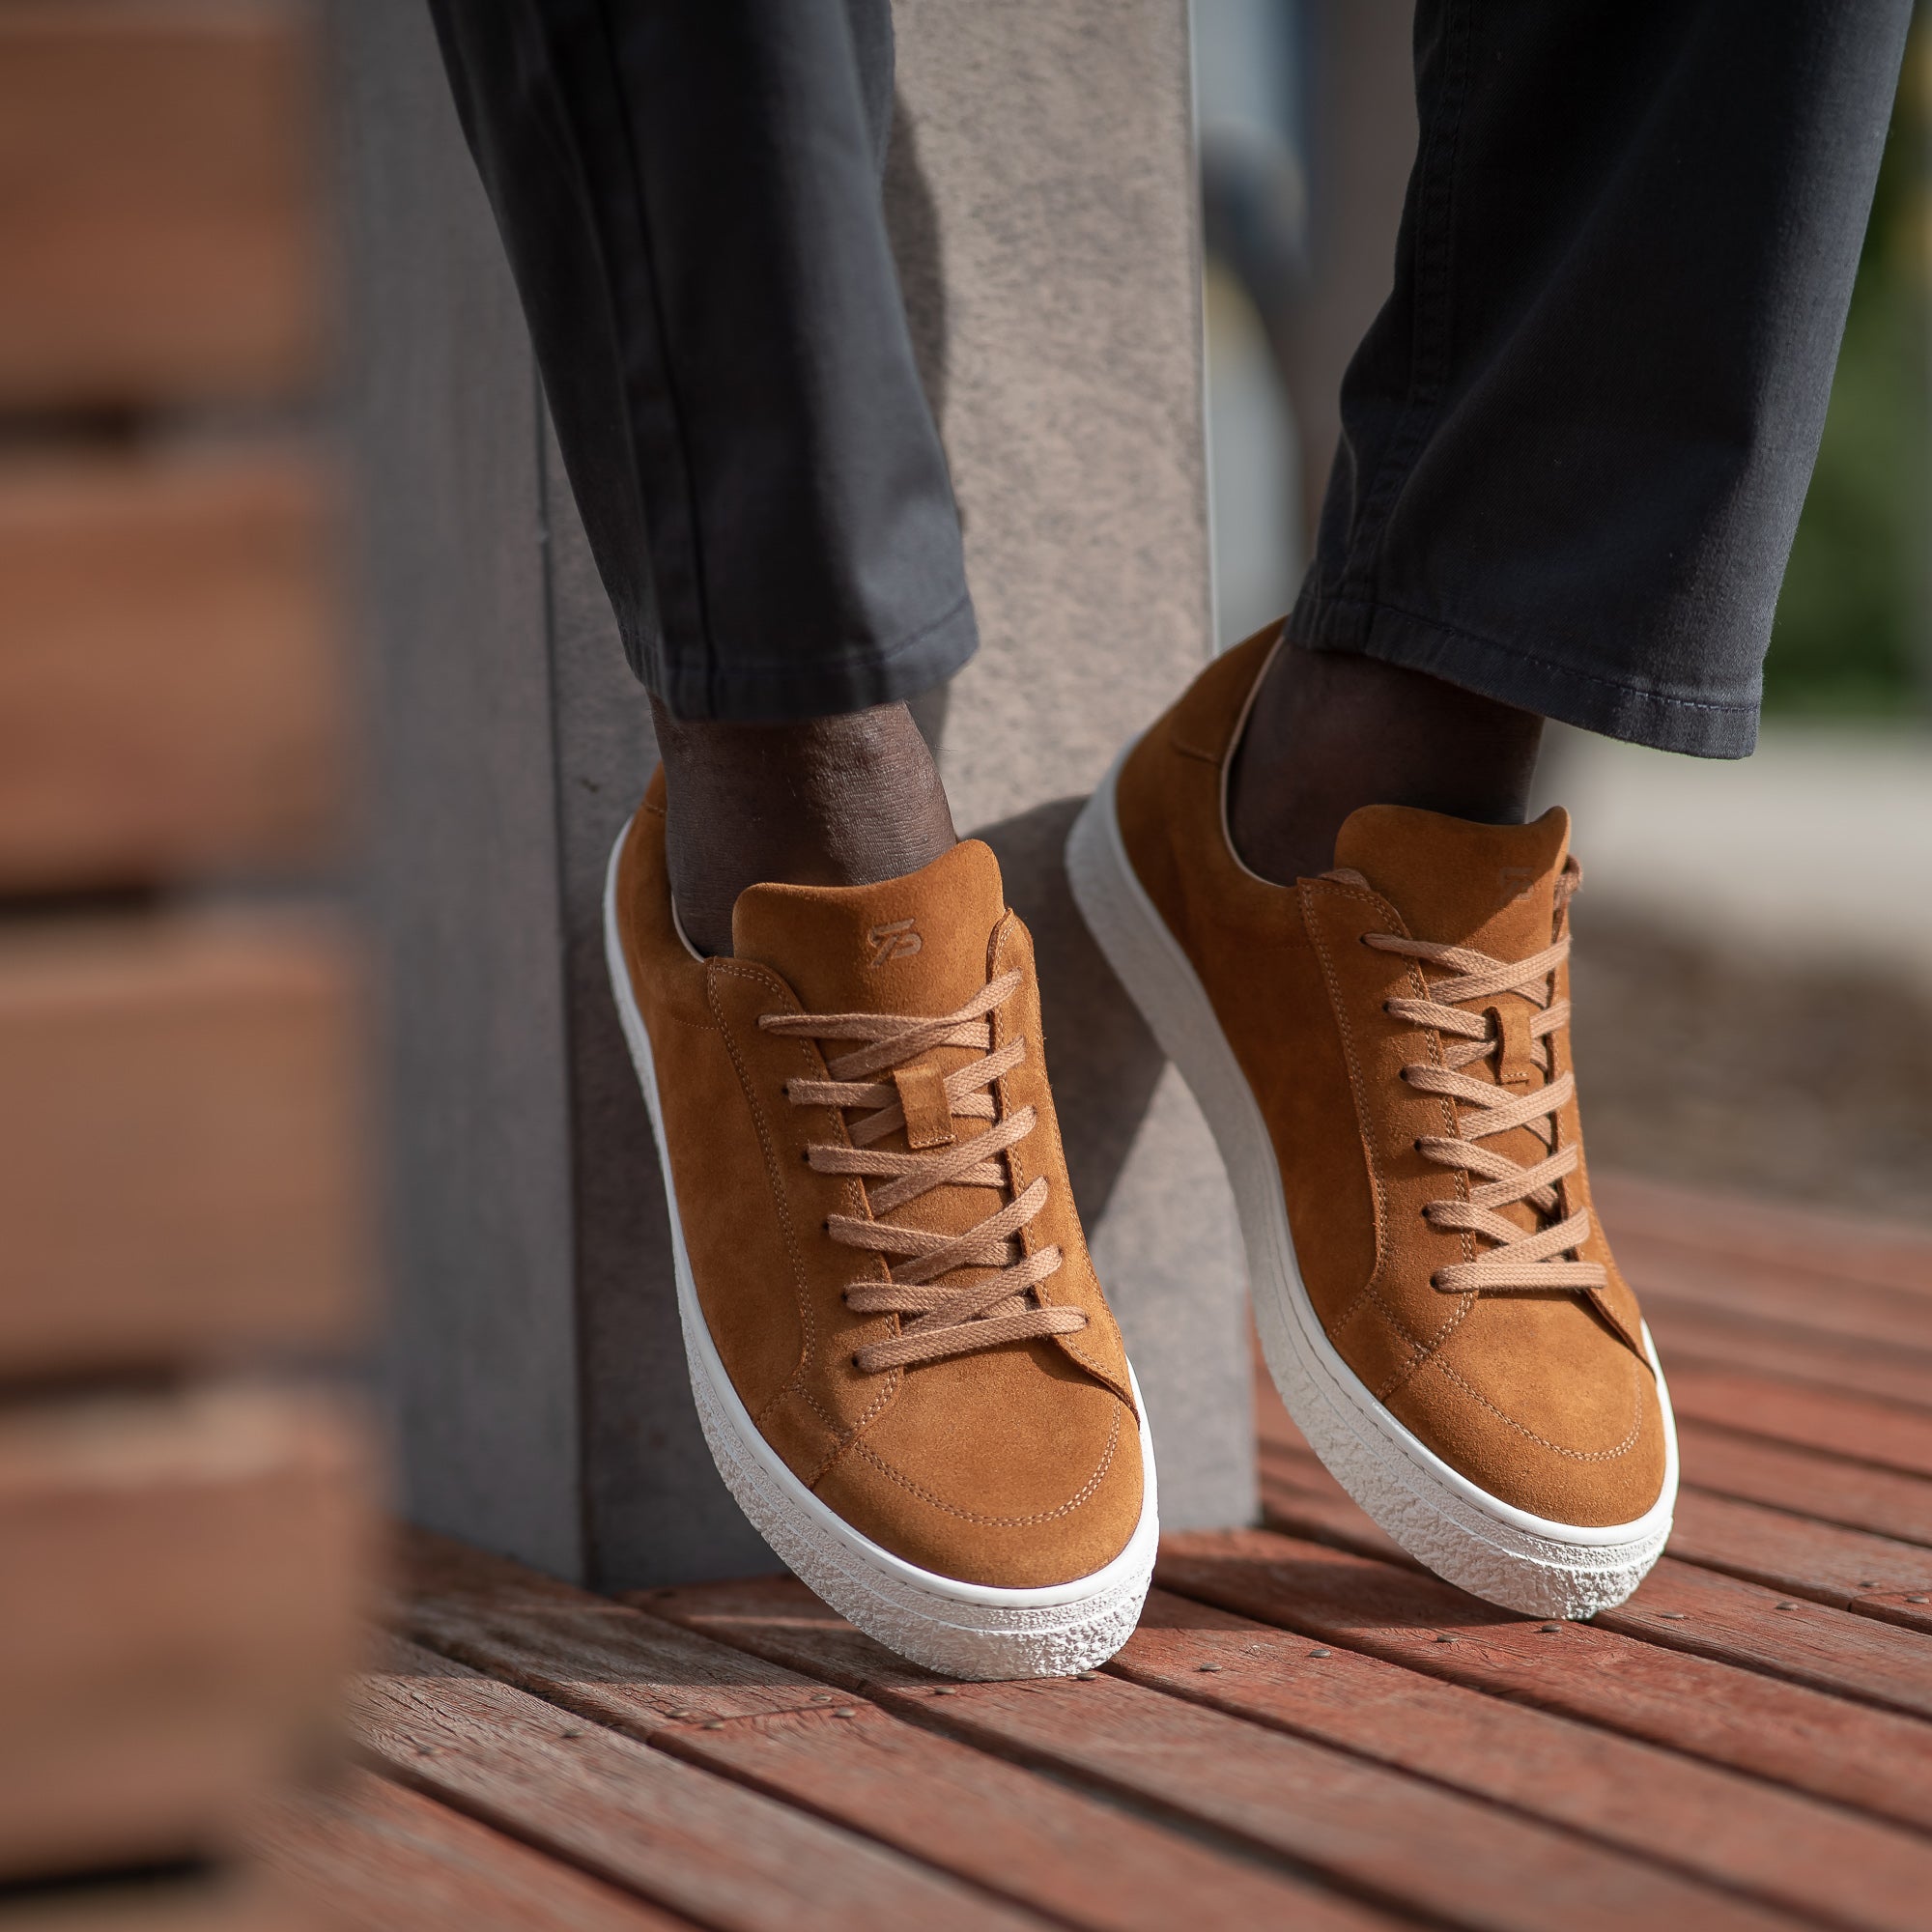 Shop Men Suede Sneakers. The best casual shoes to wear with jeans, chinos and blazers